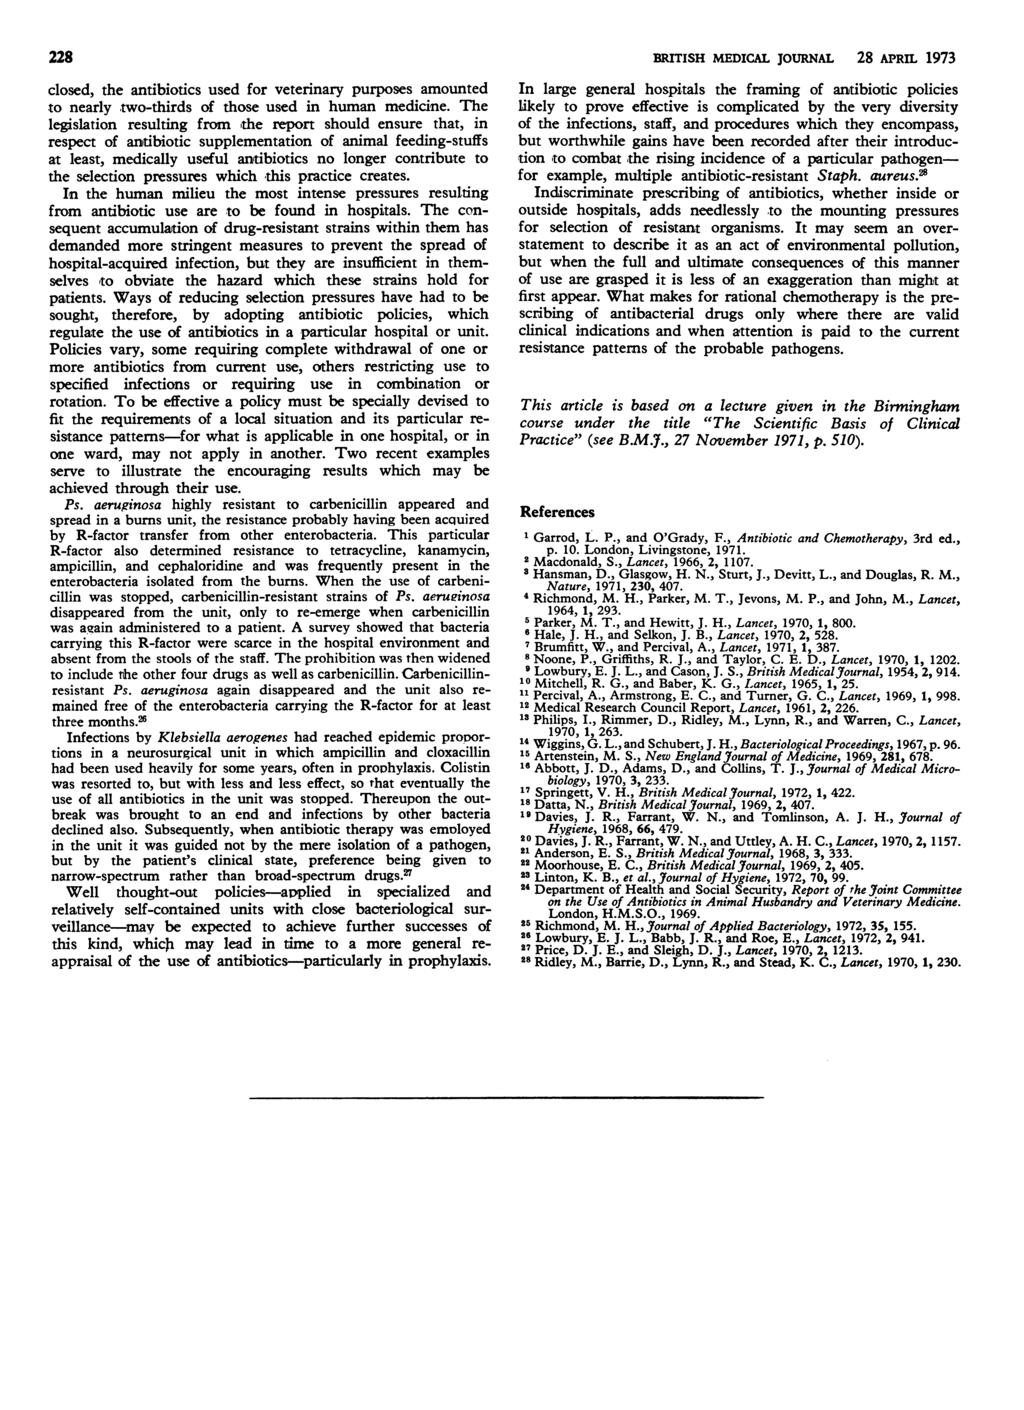 228 BRITISH MEDICAL journal 28 APRIL 1973 closed, the antibiotics used for veterinary purposes amounted to nearly two-thirds of those used in human medicine.